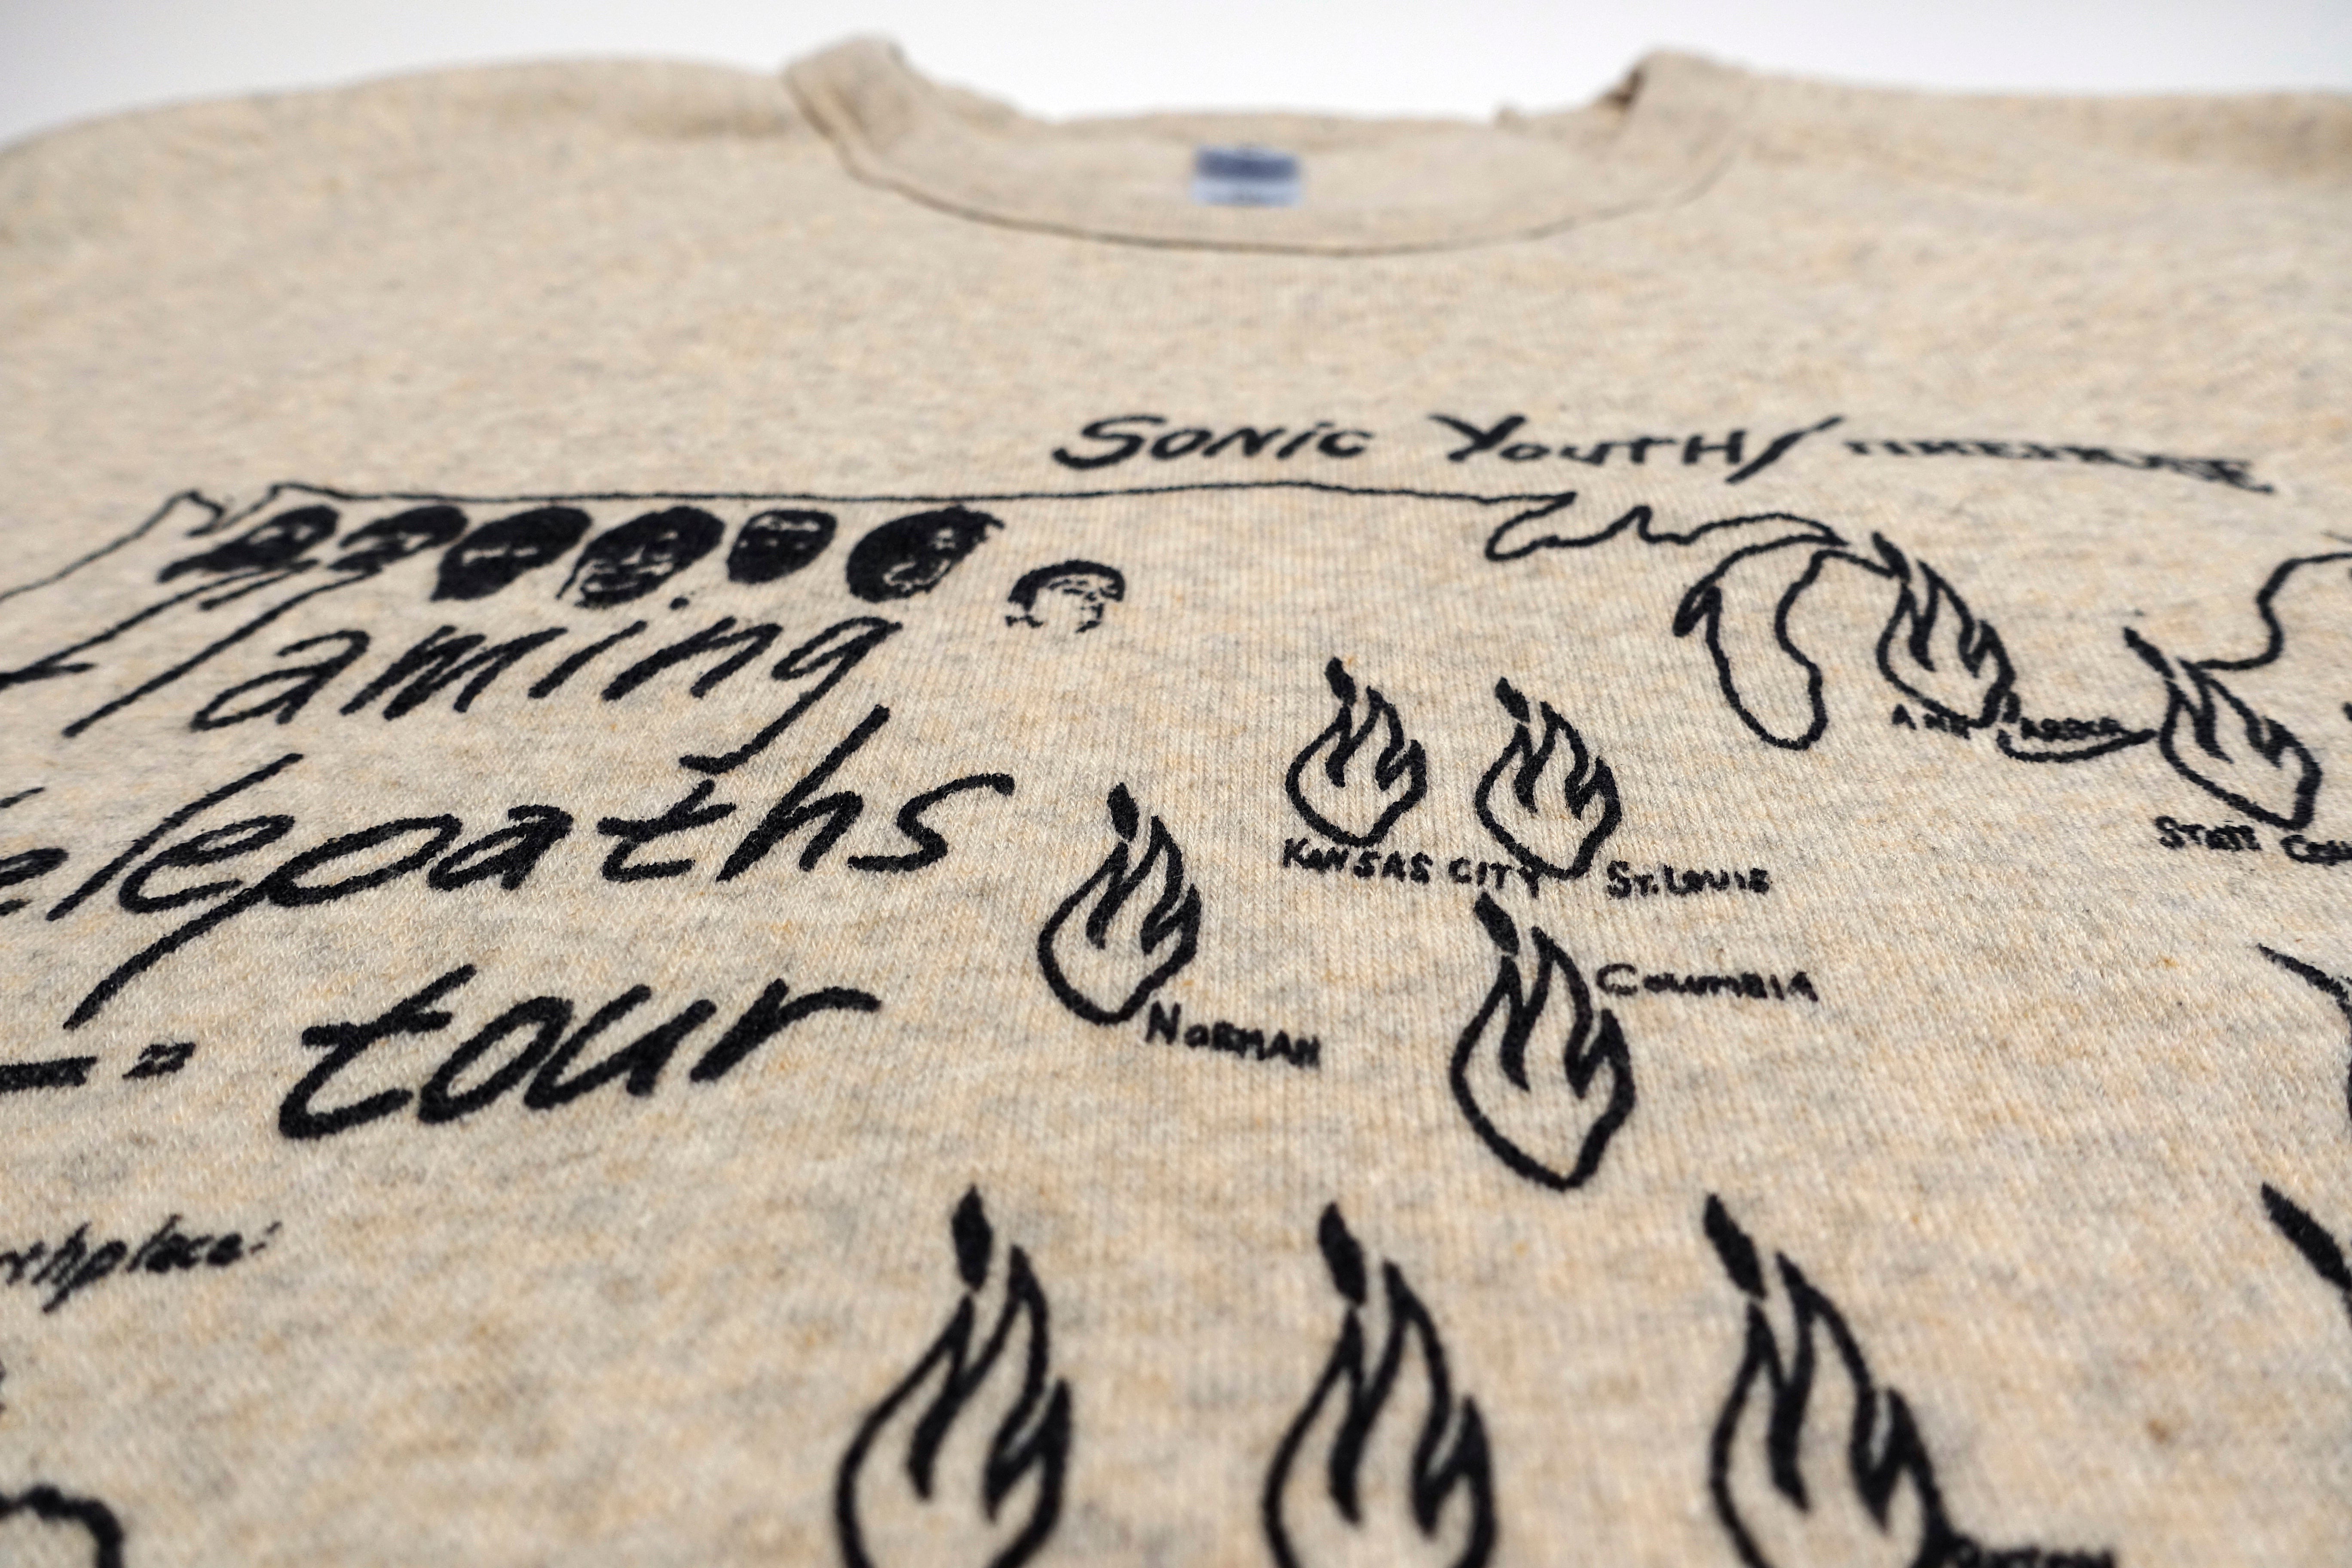 Sonic Youth / fIREHOSE - Flaming Telepaths 1986 Tour (Bootleg By Me) Sweat  Shirt Size XL